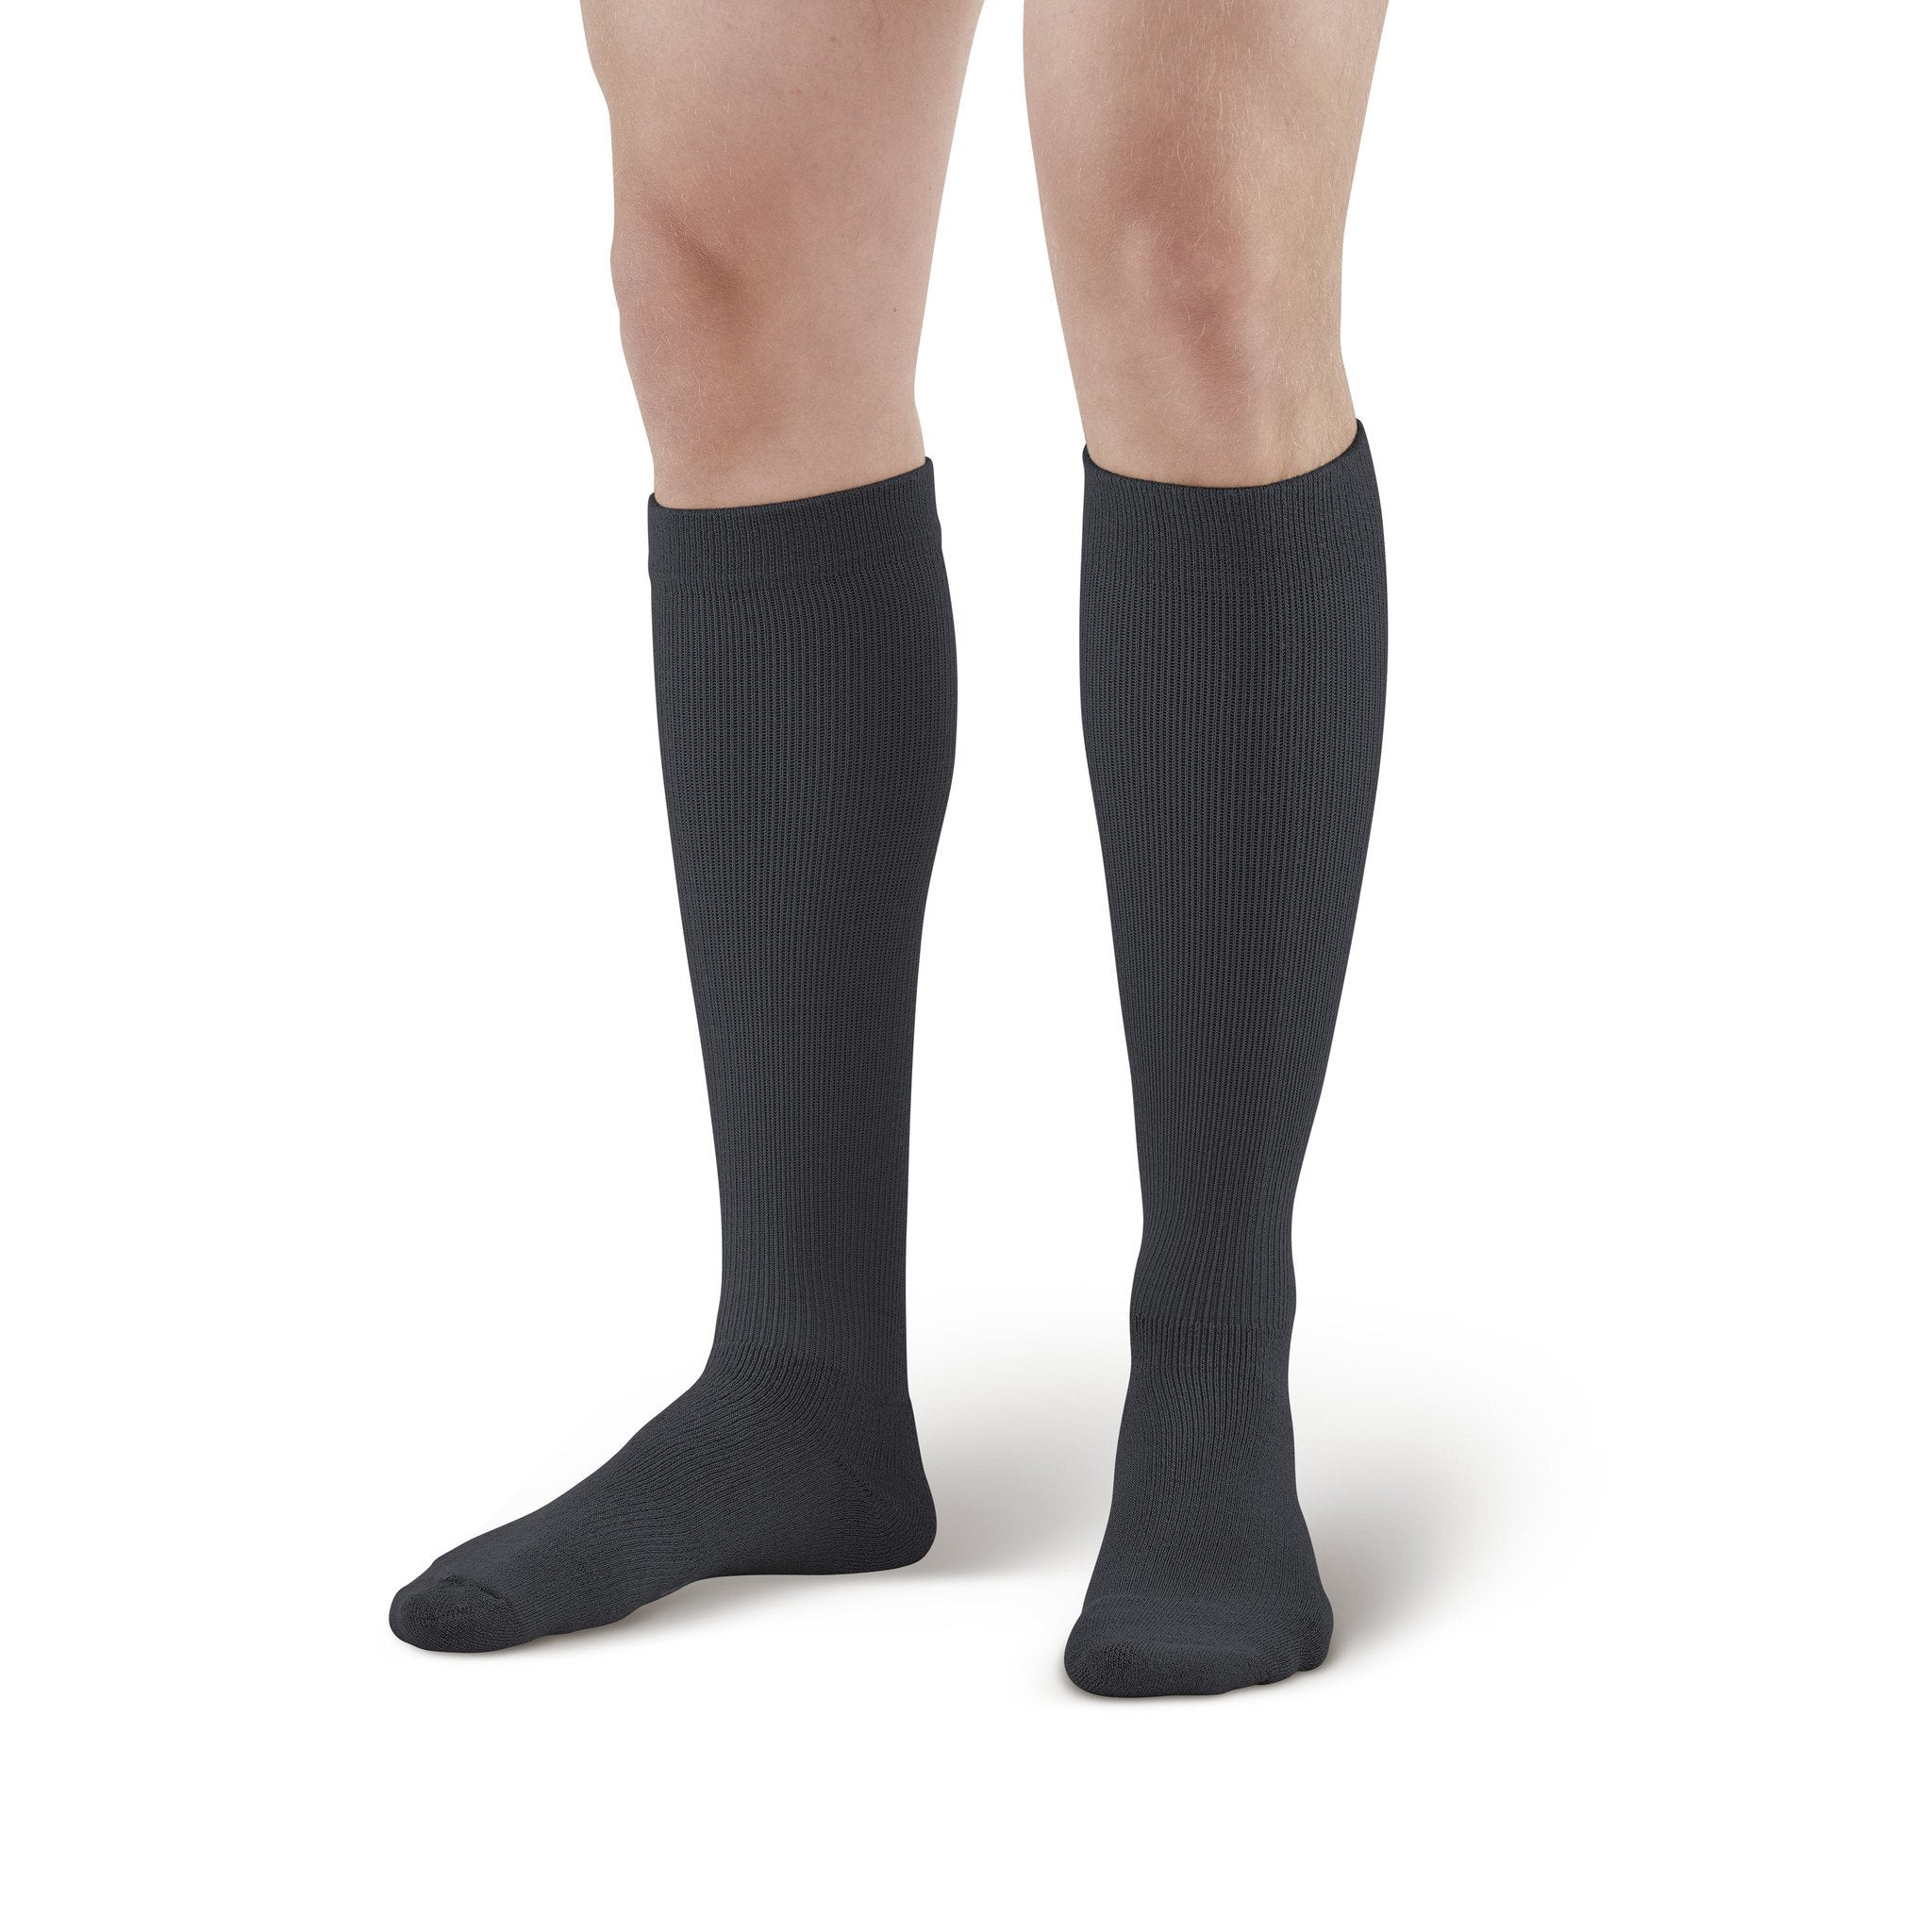 Support Plus Men's Cotton Wide Calf Firm Compression Knee High Socks